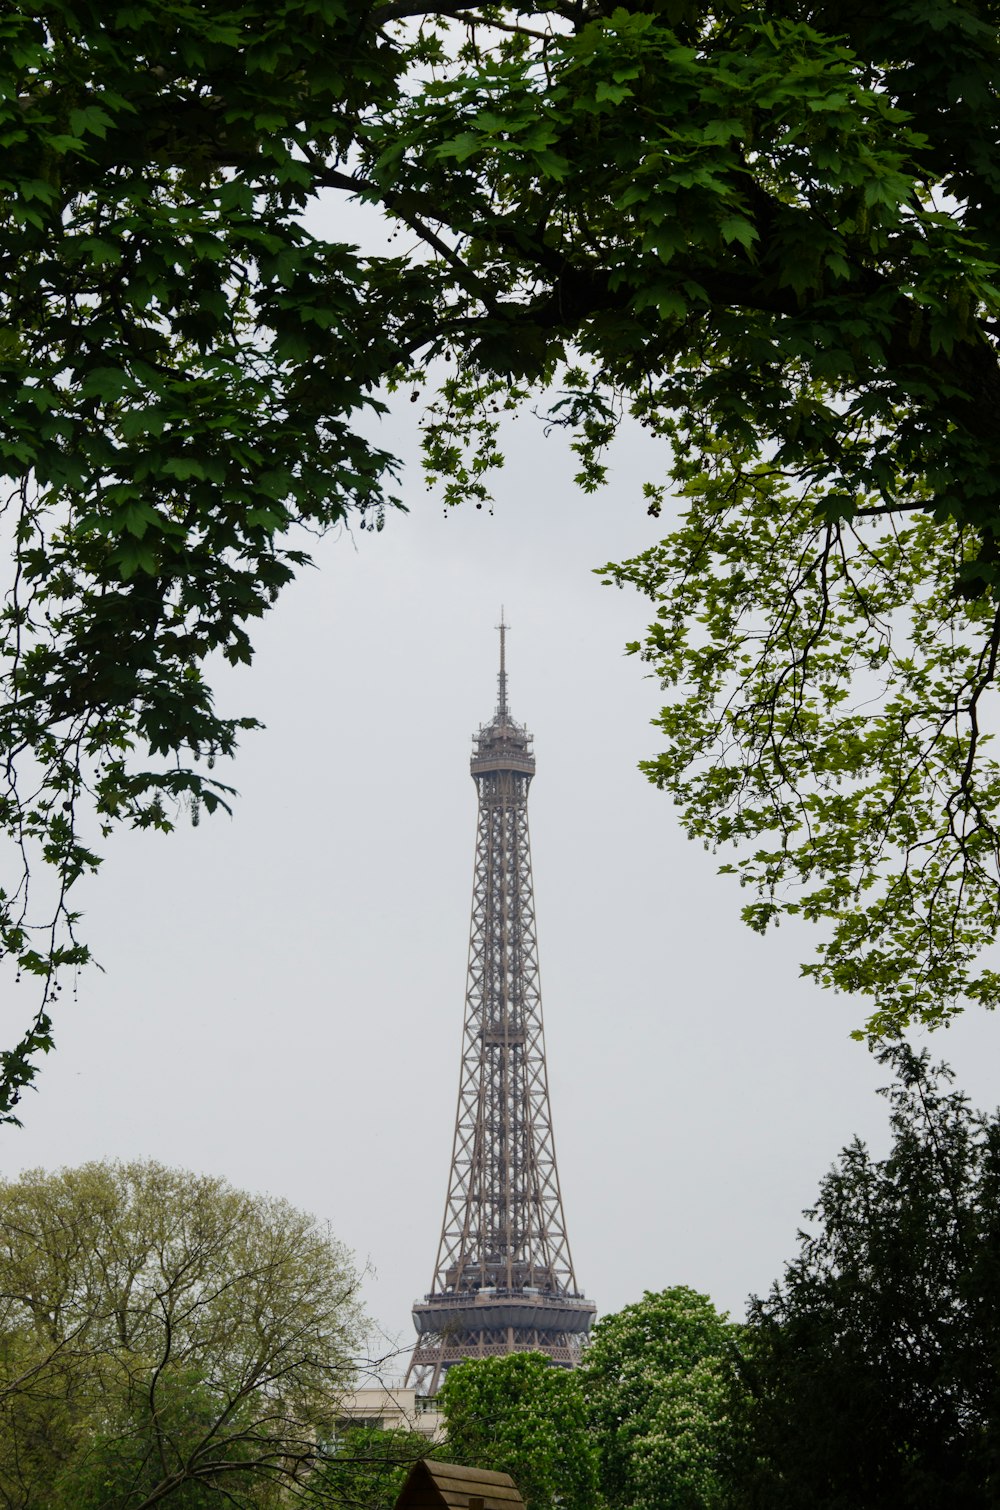 a view of the eiffel tower through some trees